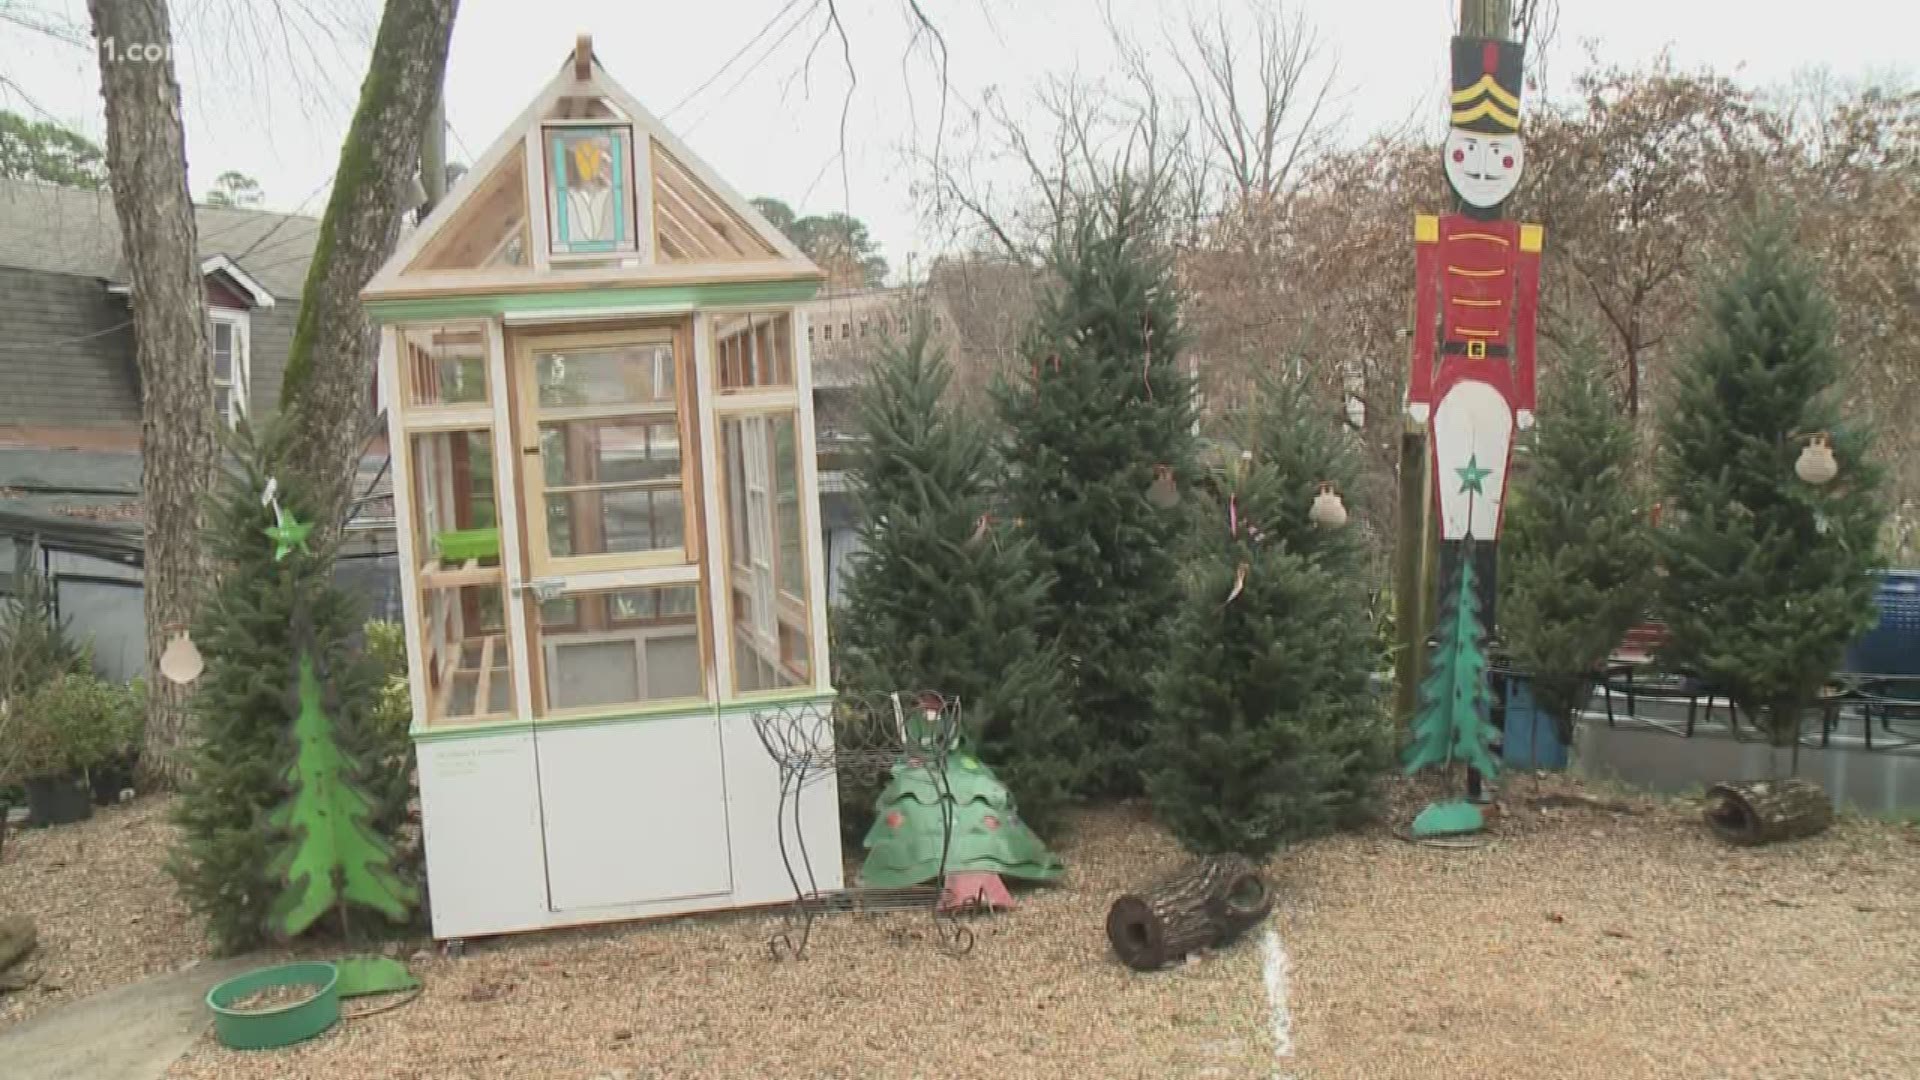 As the holidays get closer, some businesses are thinking of those who may not be as fortunate.